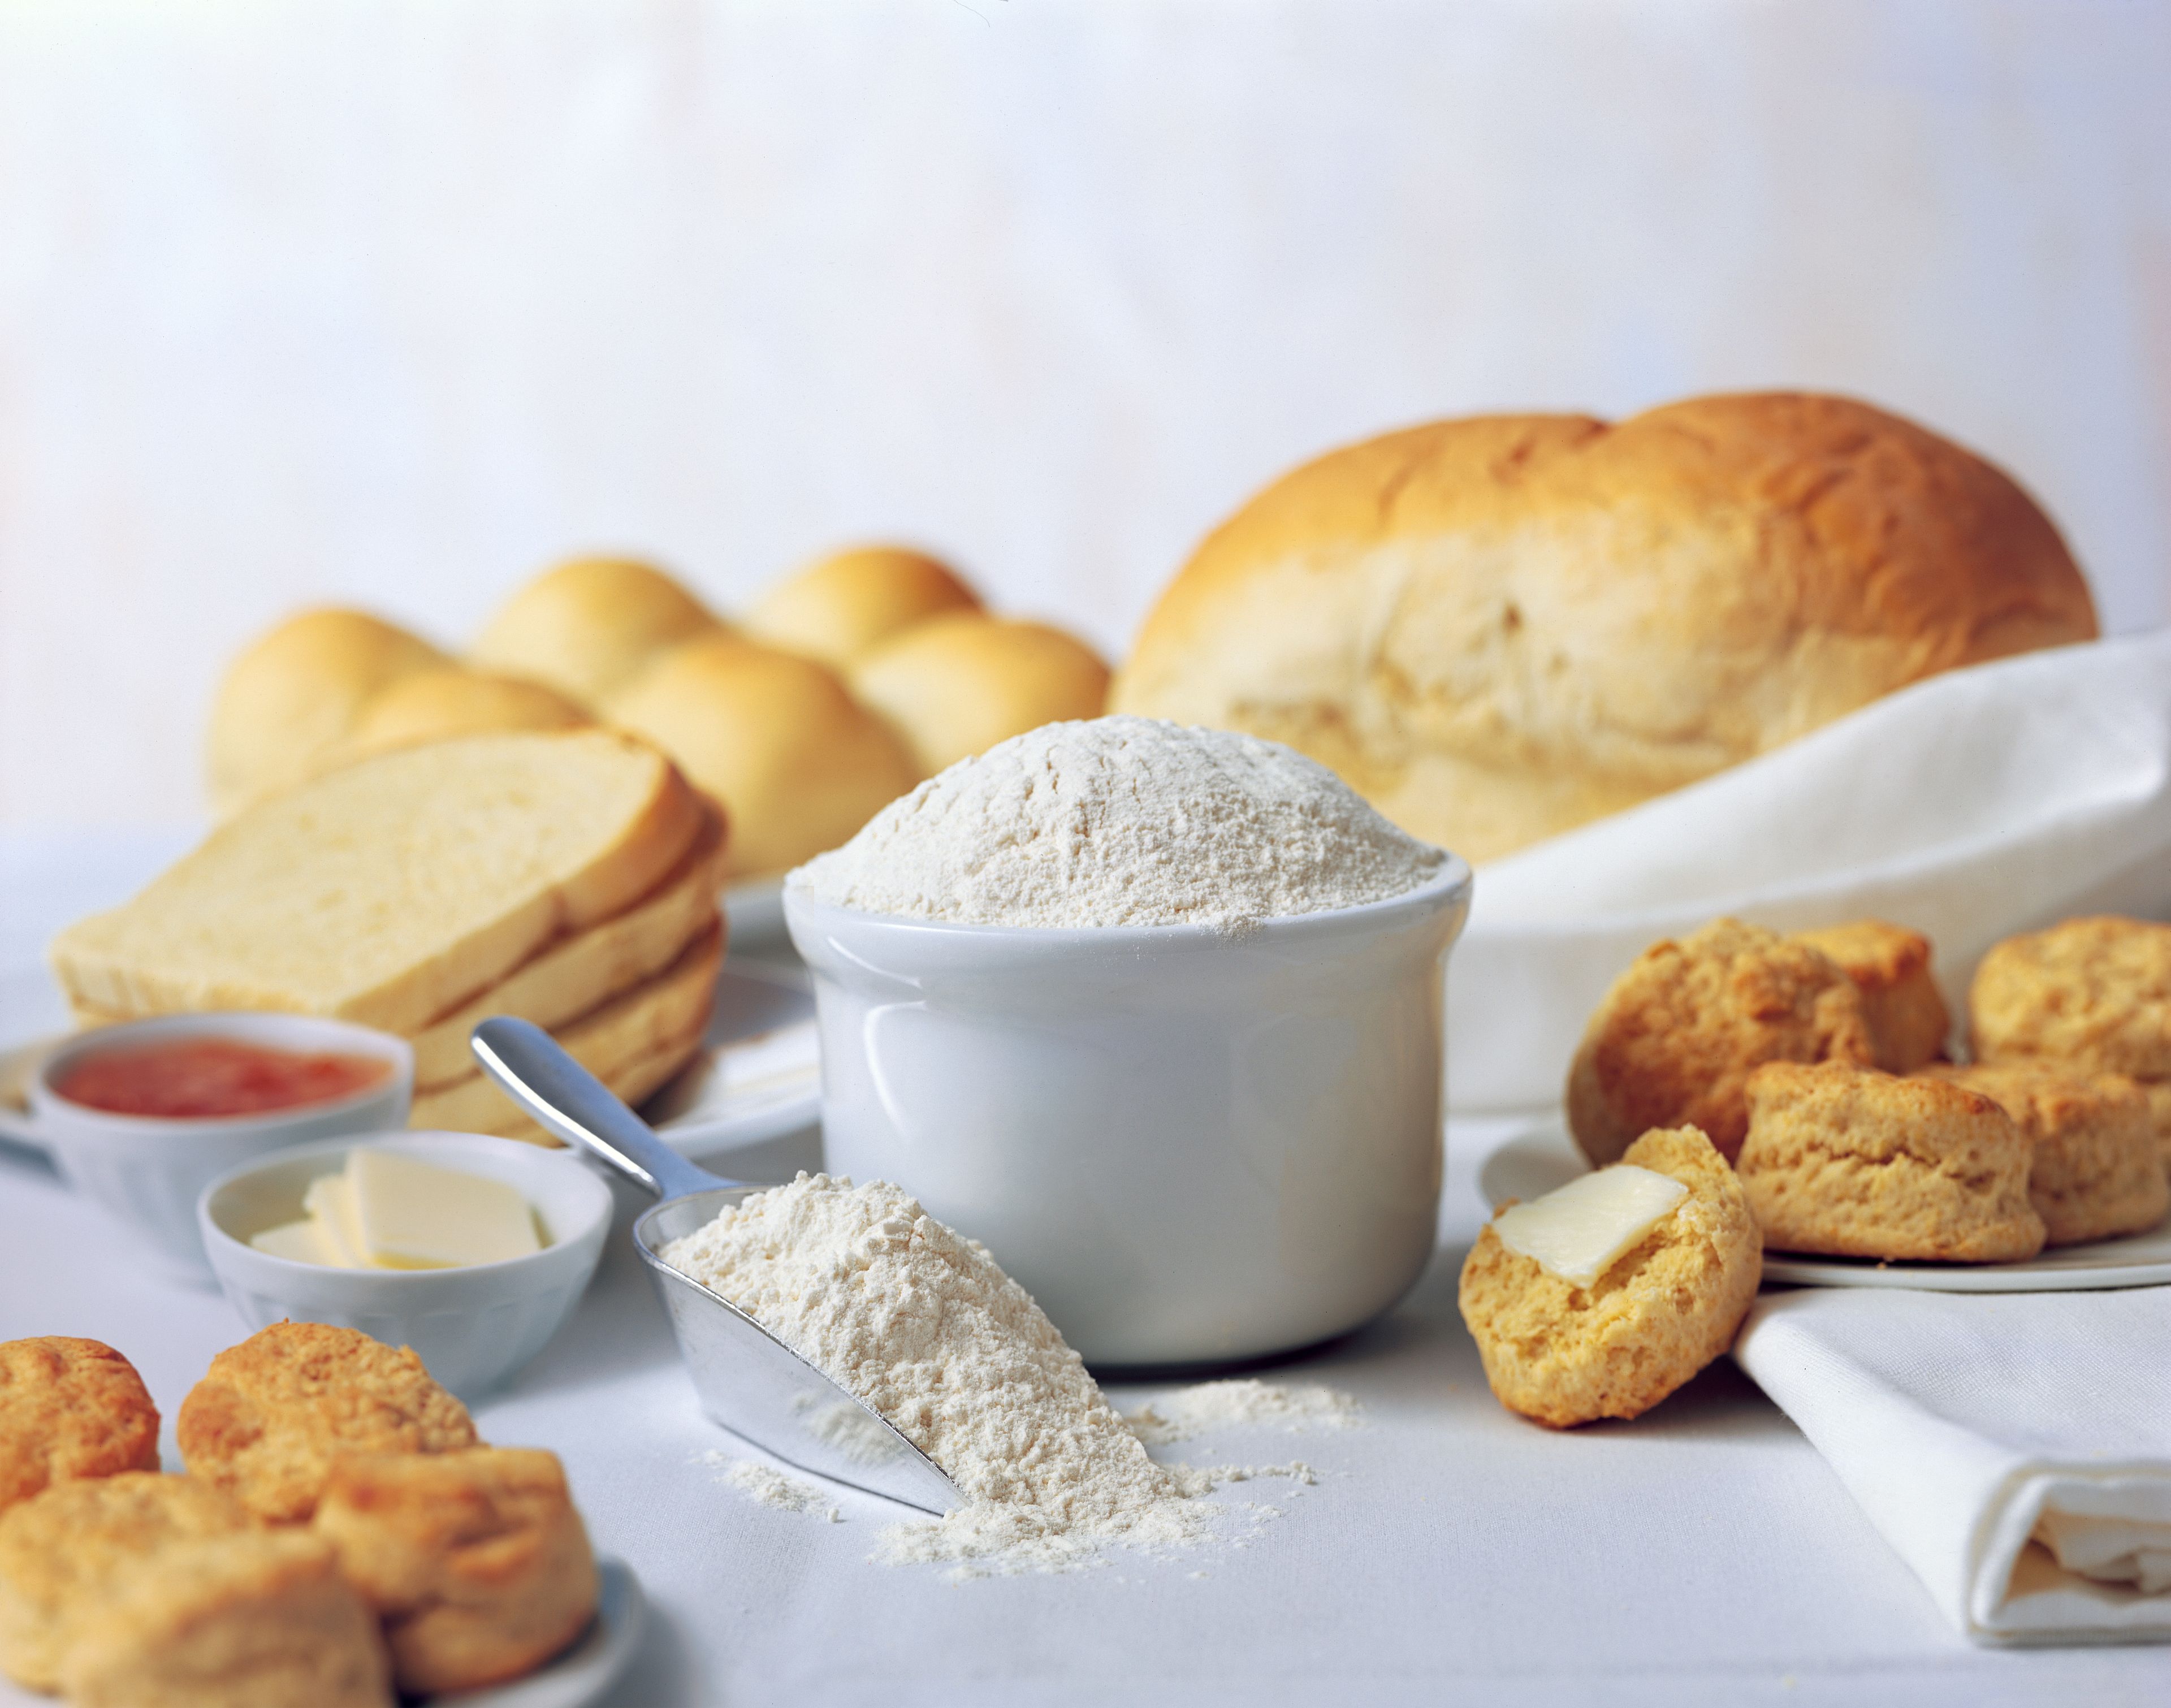 A setting of different kinds of breads and flour.